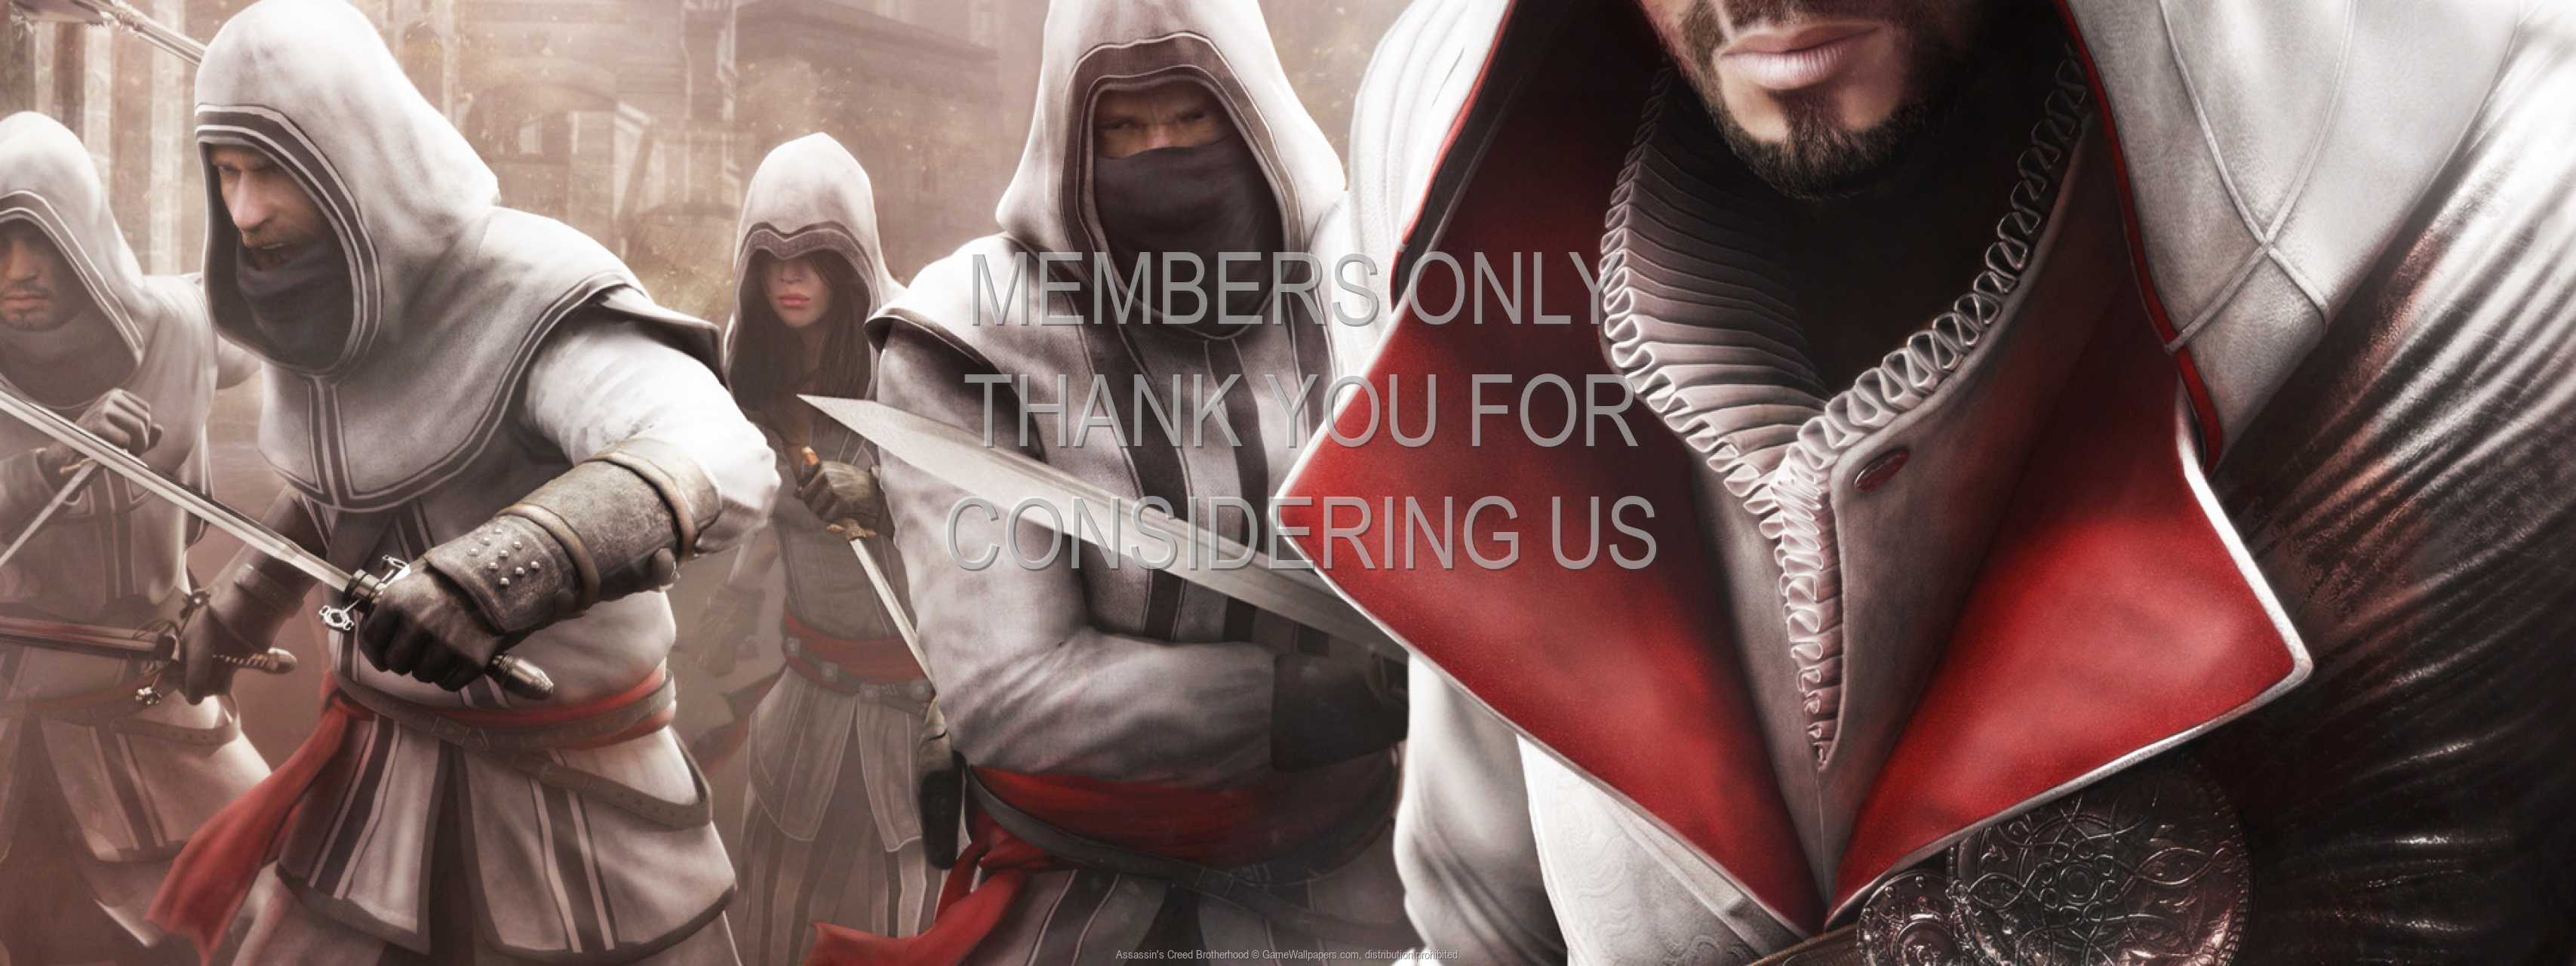 Assassin's Creed: Brotherhood 720p Horizontal Mobile wallpaper or background 02